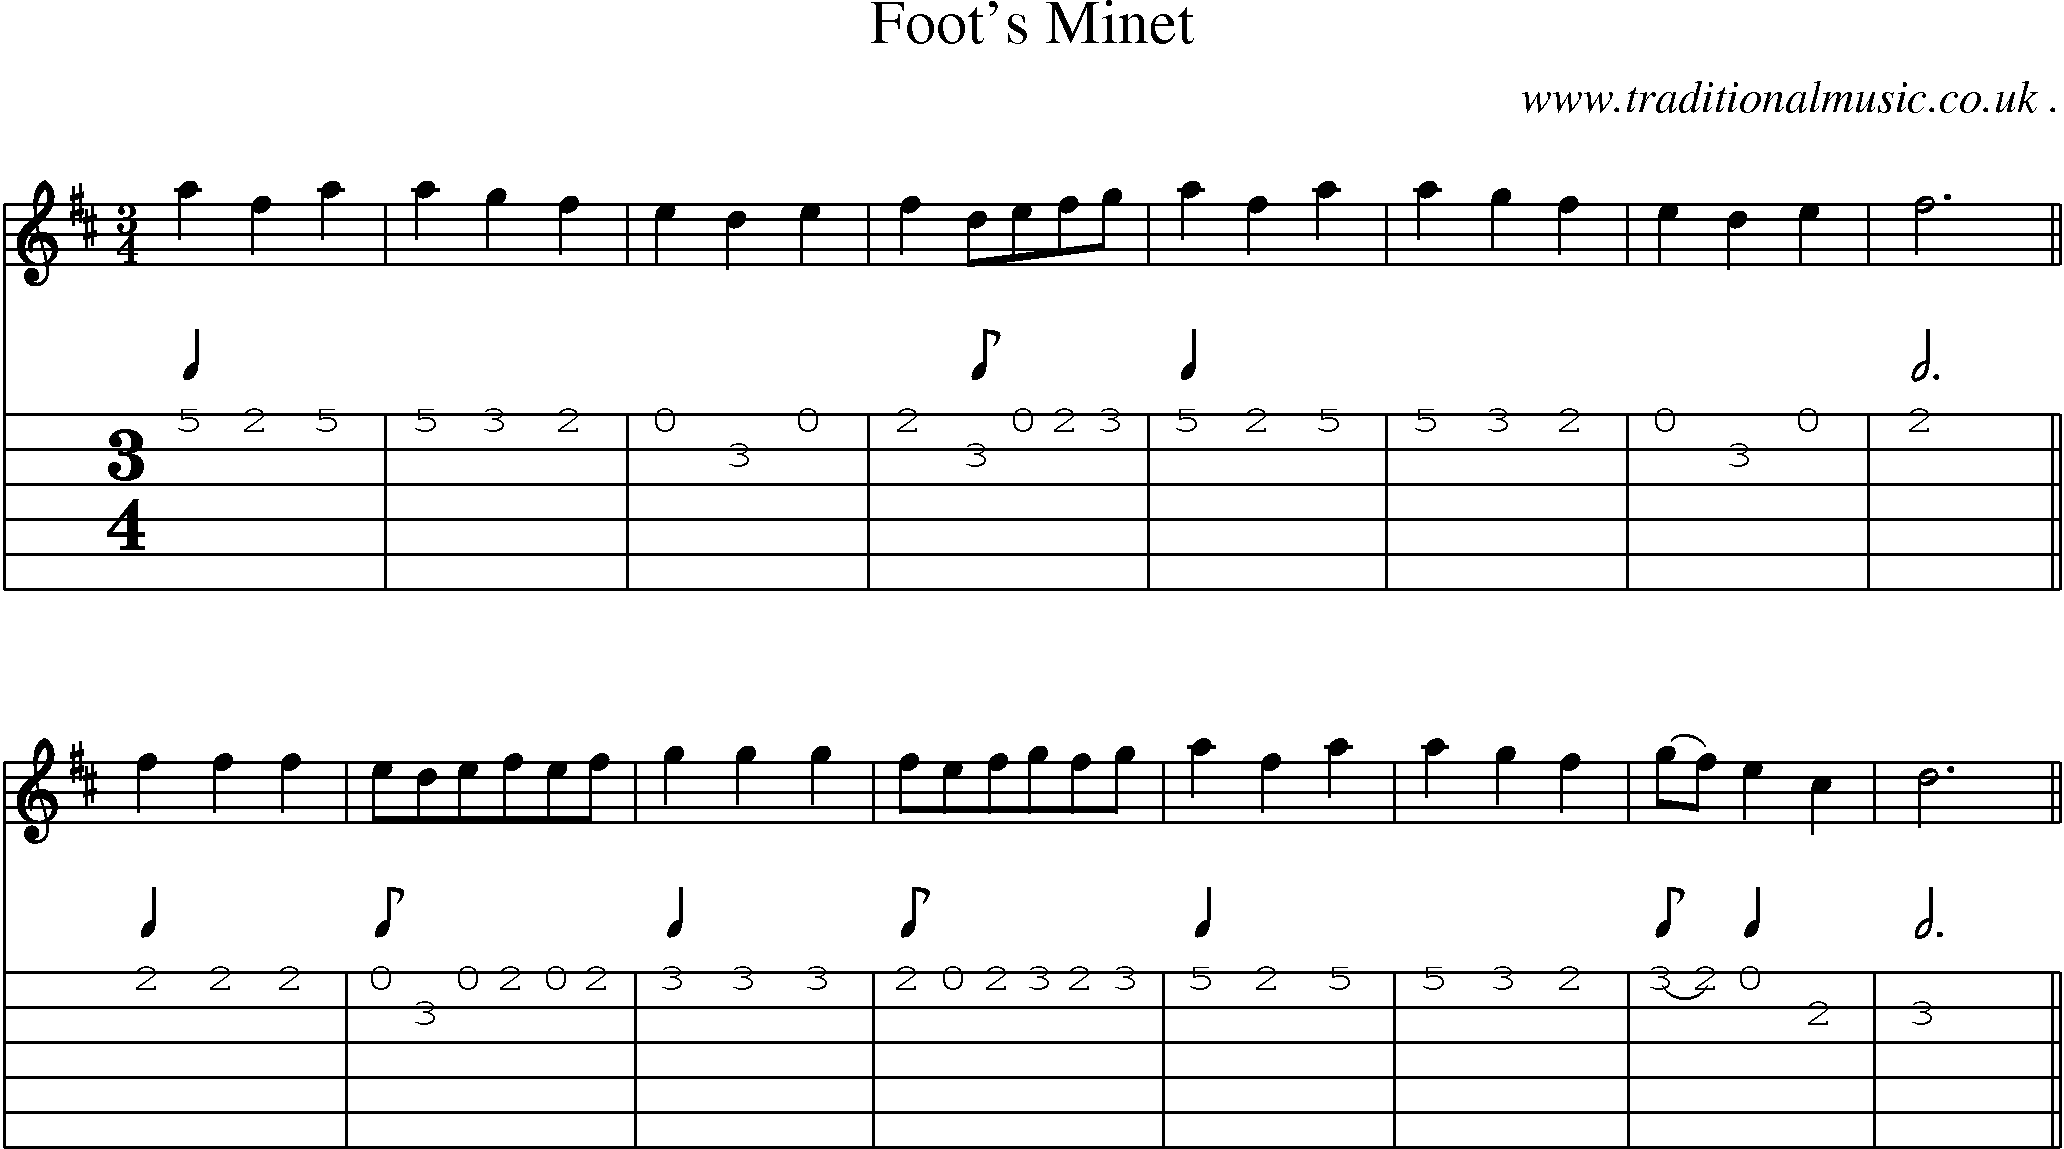 Sheet-Music and Guitar Tabs for Foot Minet